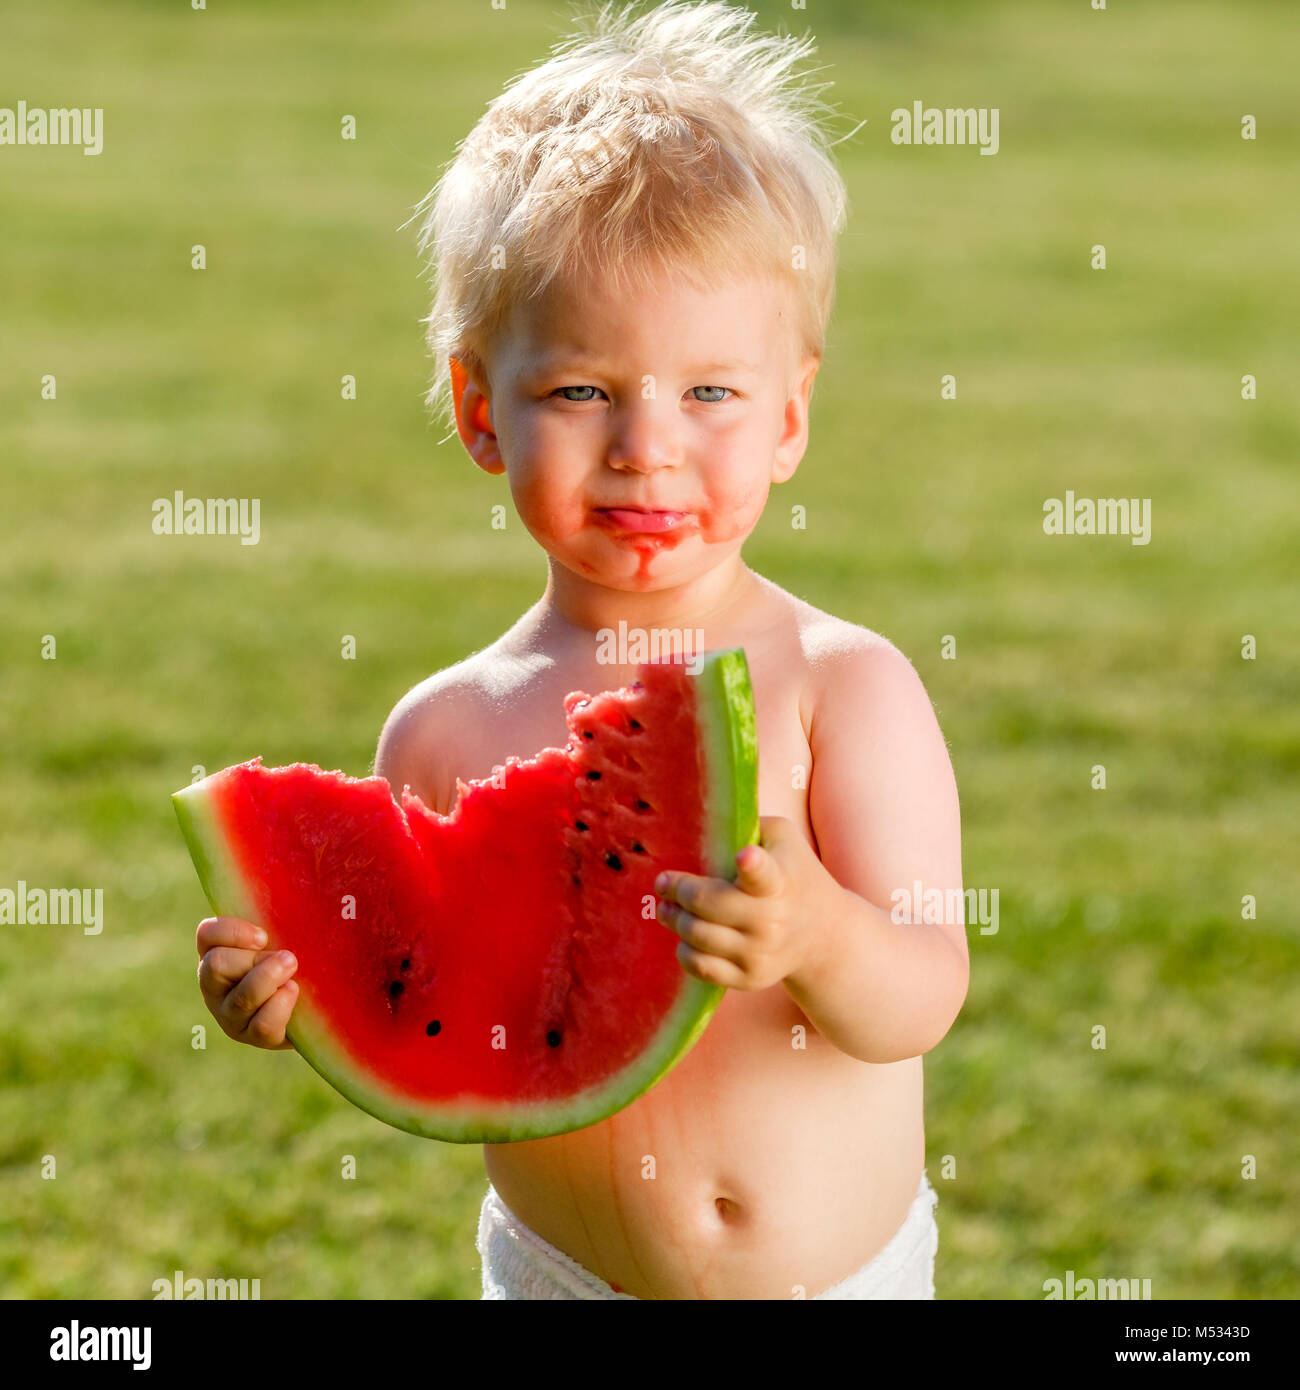 One year old baby boy eating watermelon in the garden Stock Photo